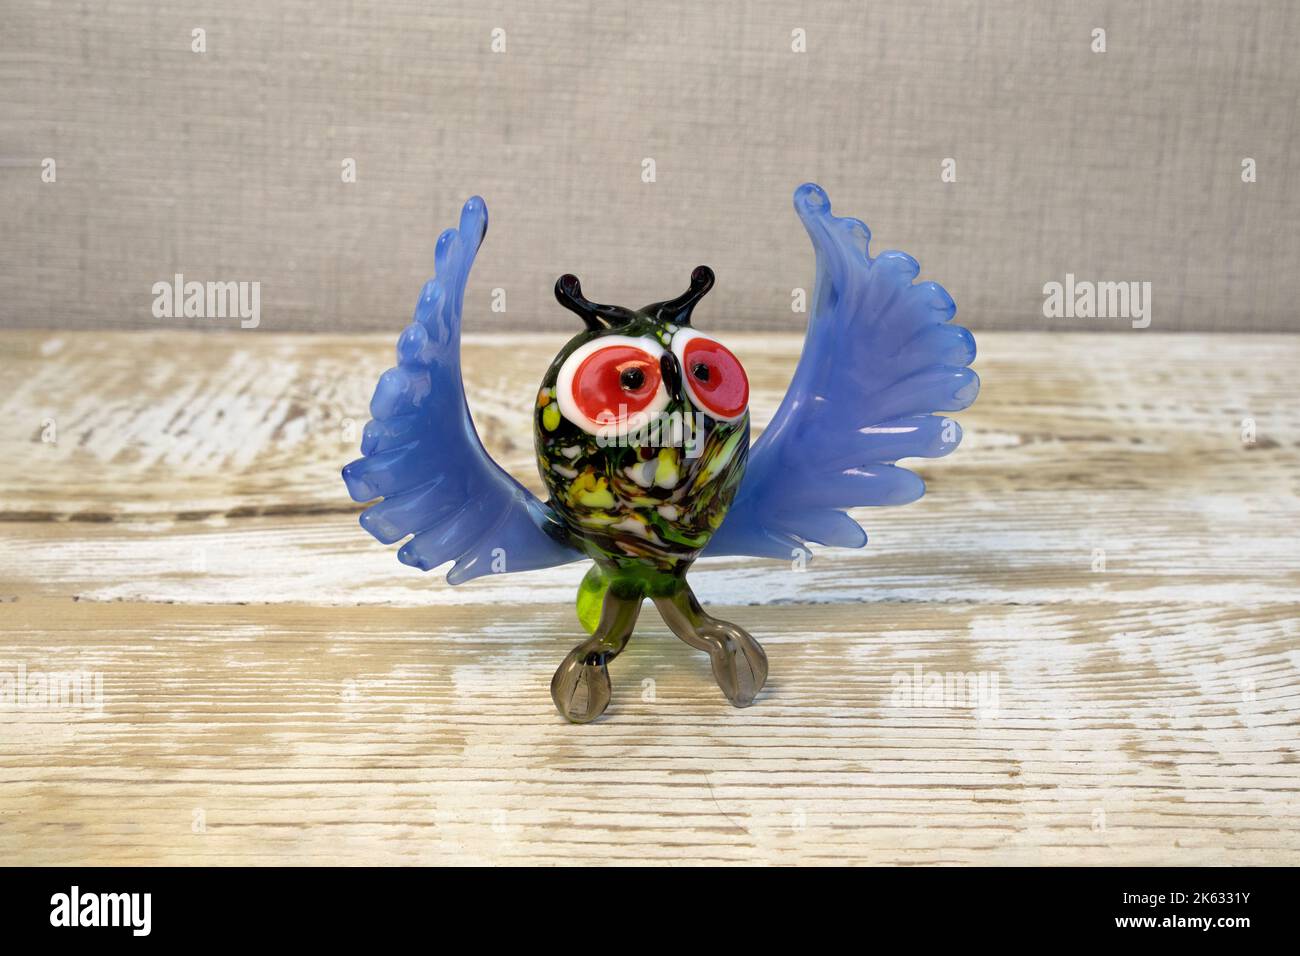 Bright glass owl figurine on rough wooden background front view Stock Photo